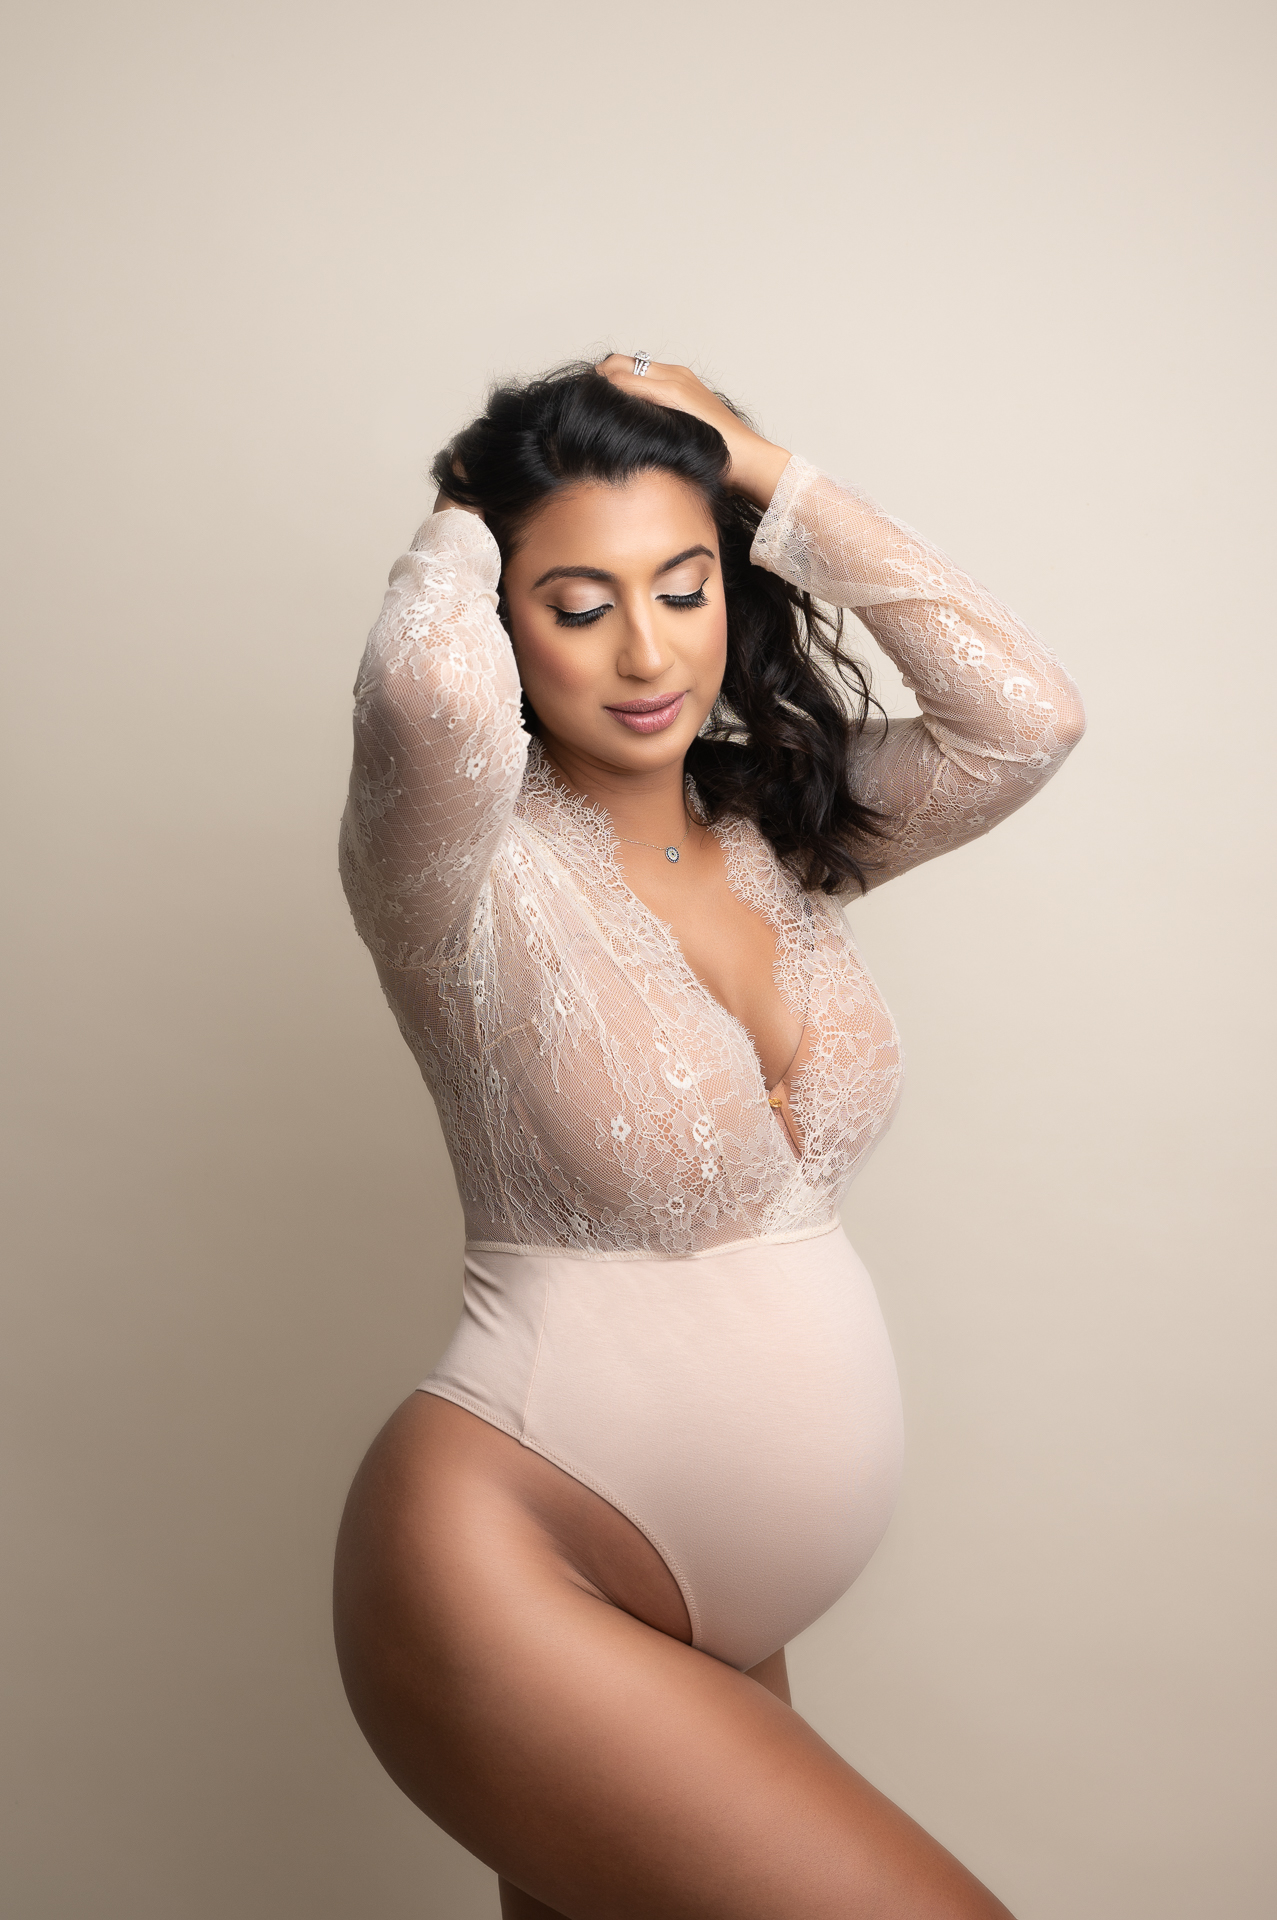 pregnant woman standing wearing a half lace top bodysuit outfit